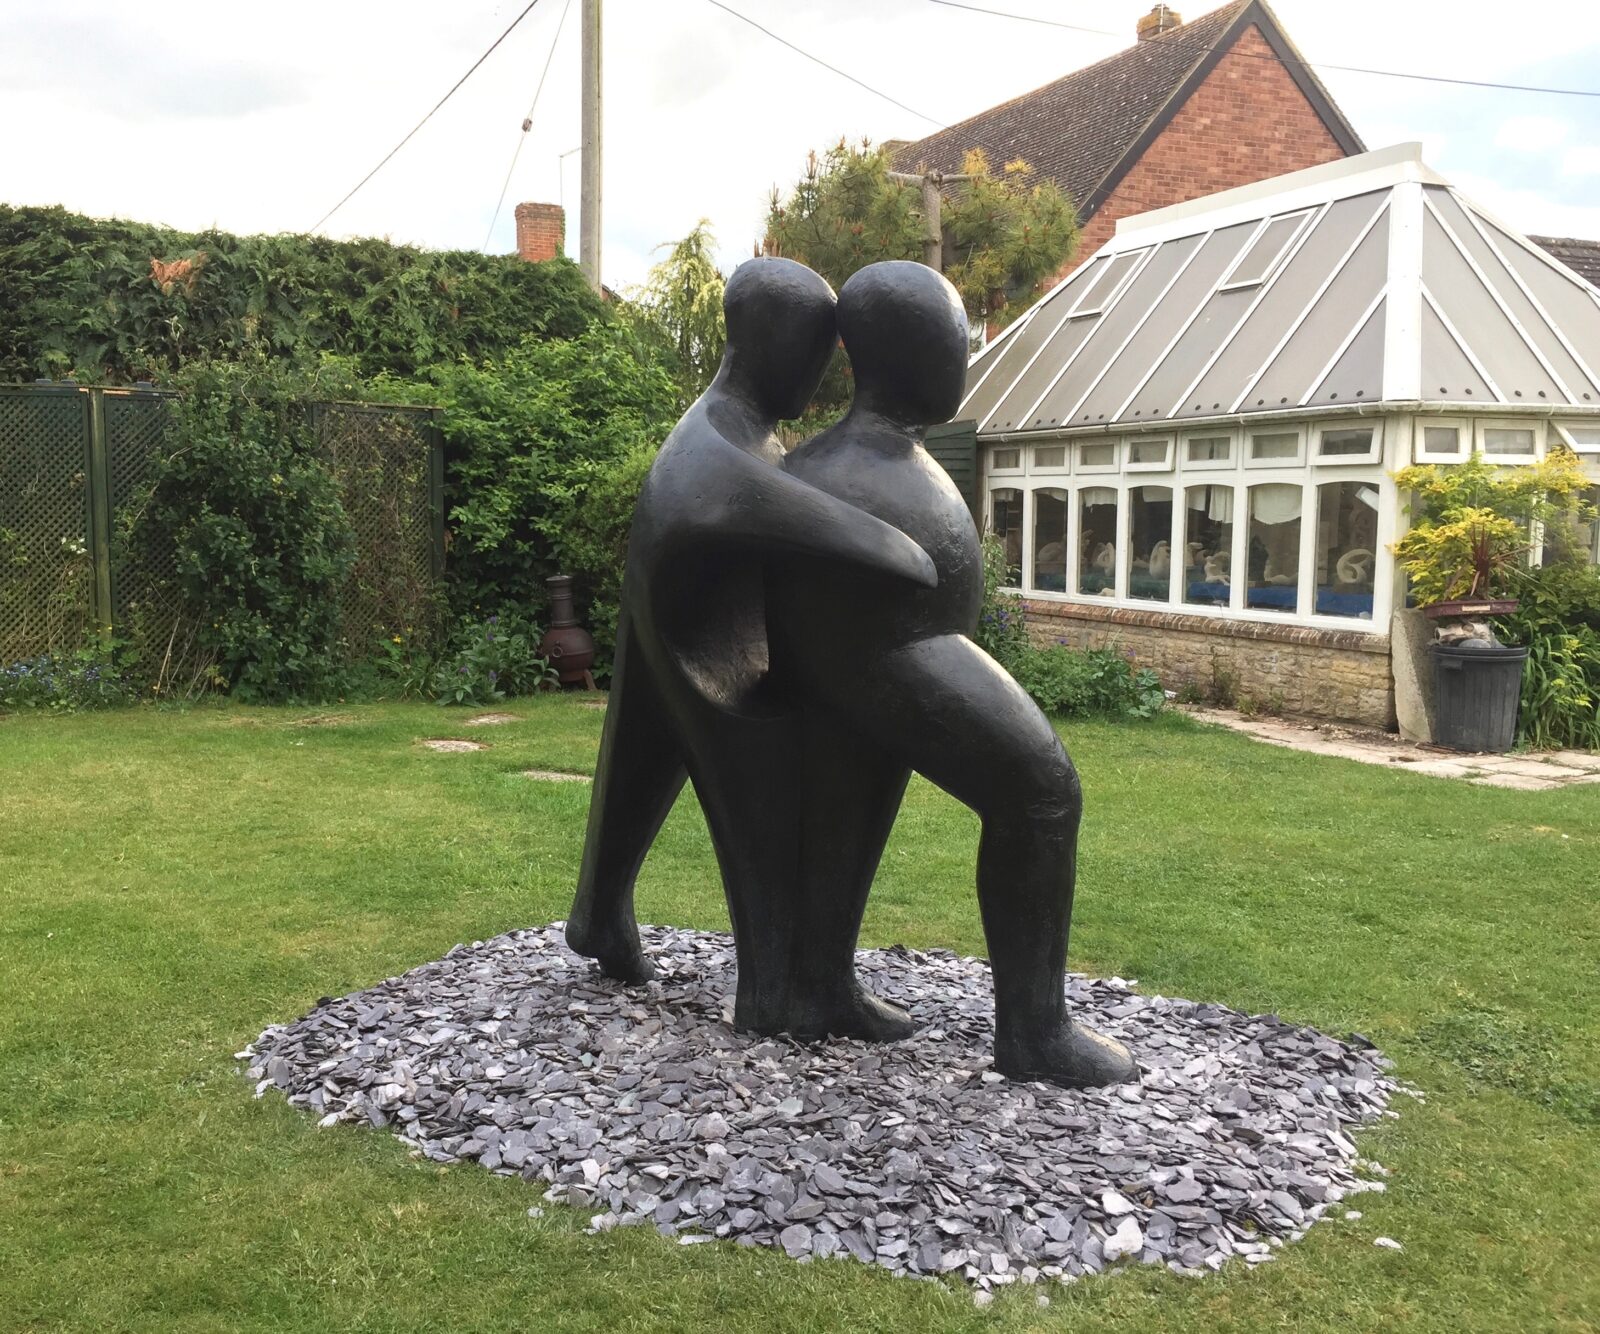 Different views of the large life size sculpture of two abstracted figures commissioned by an UK Hospital